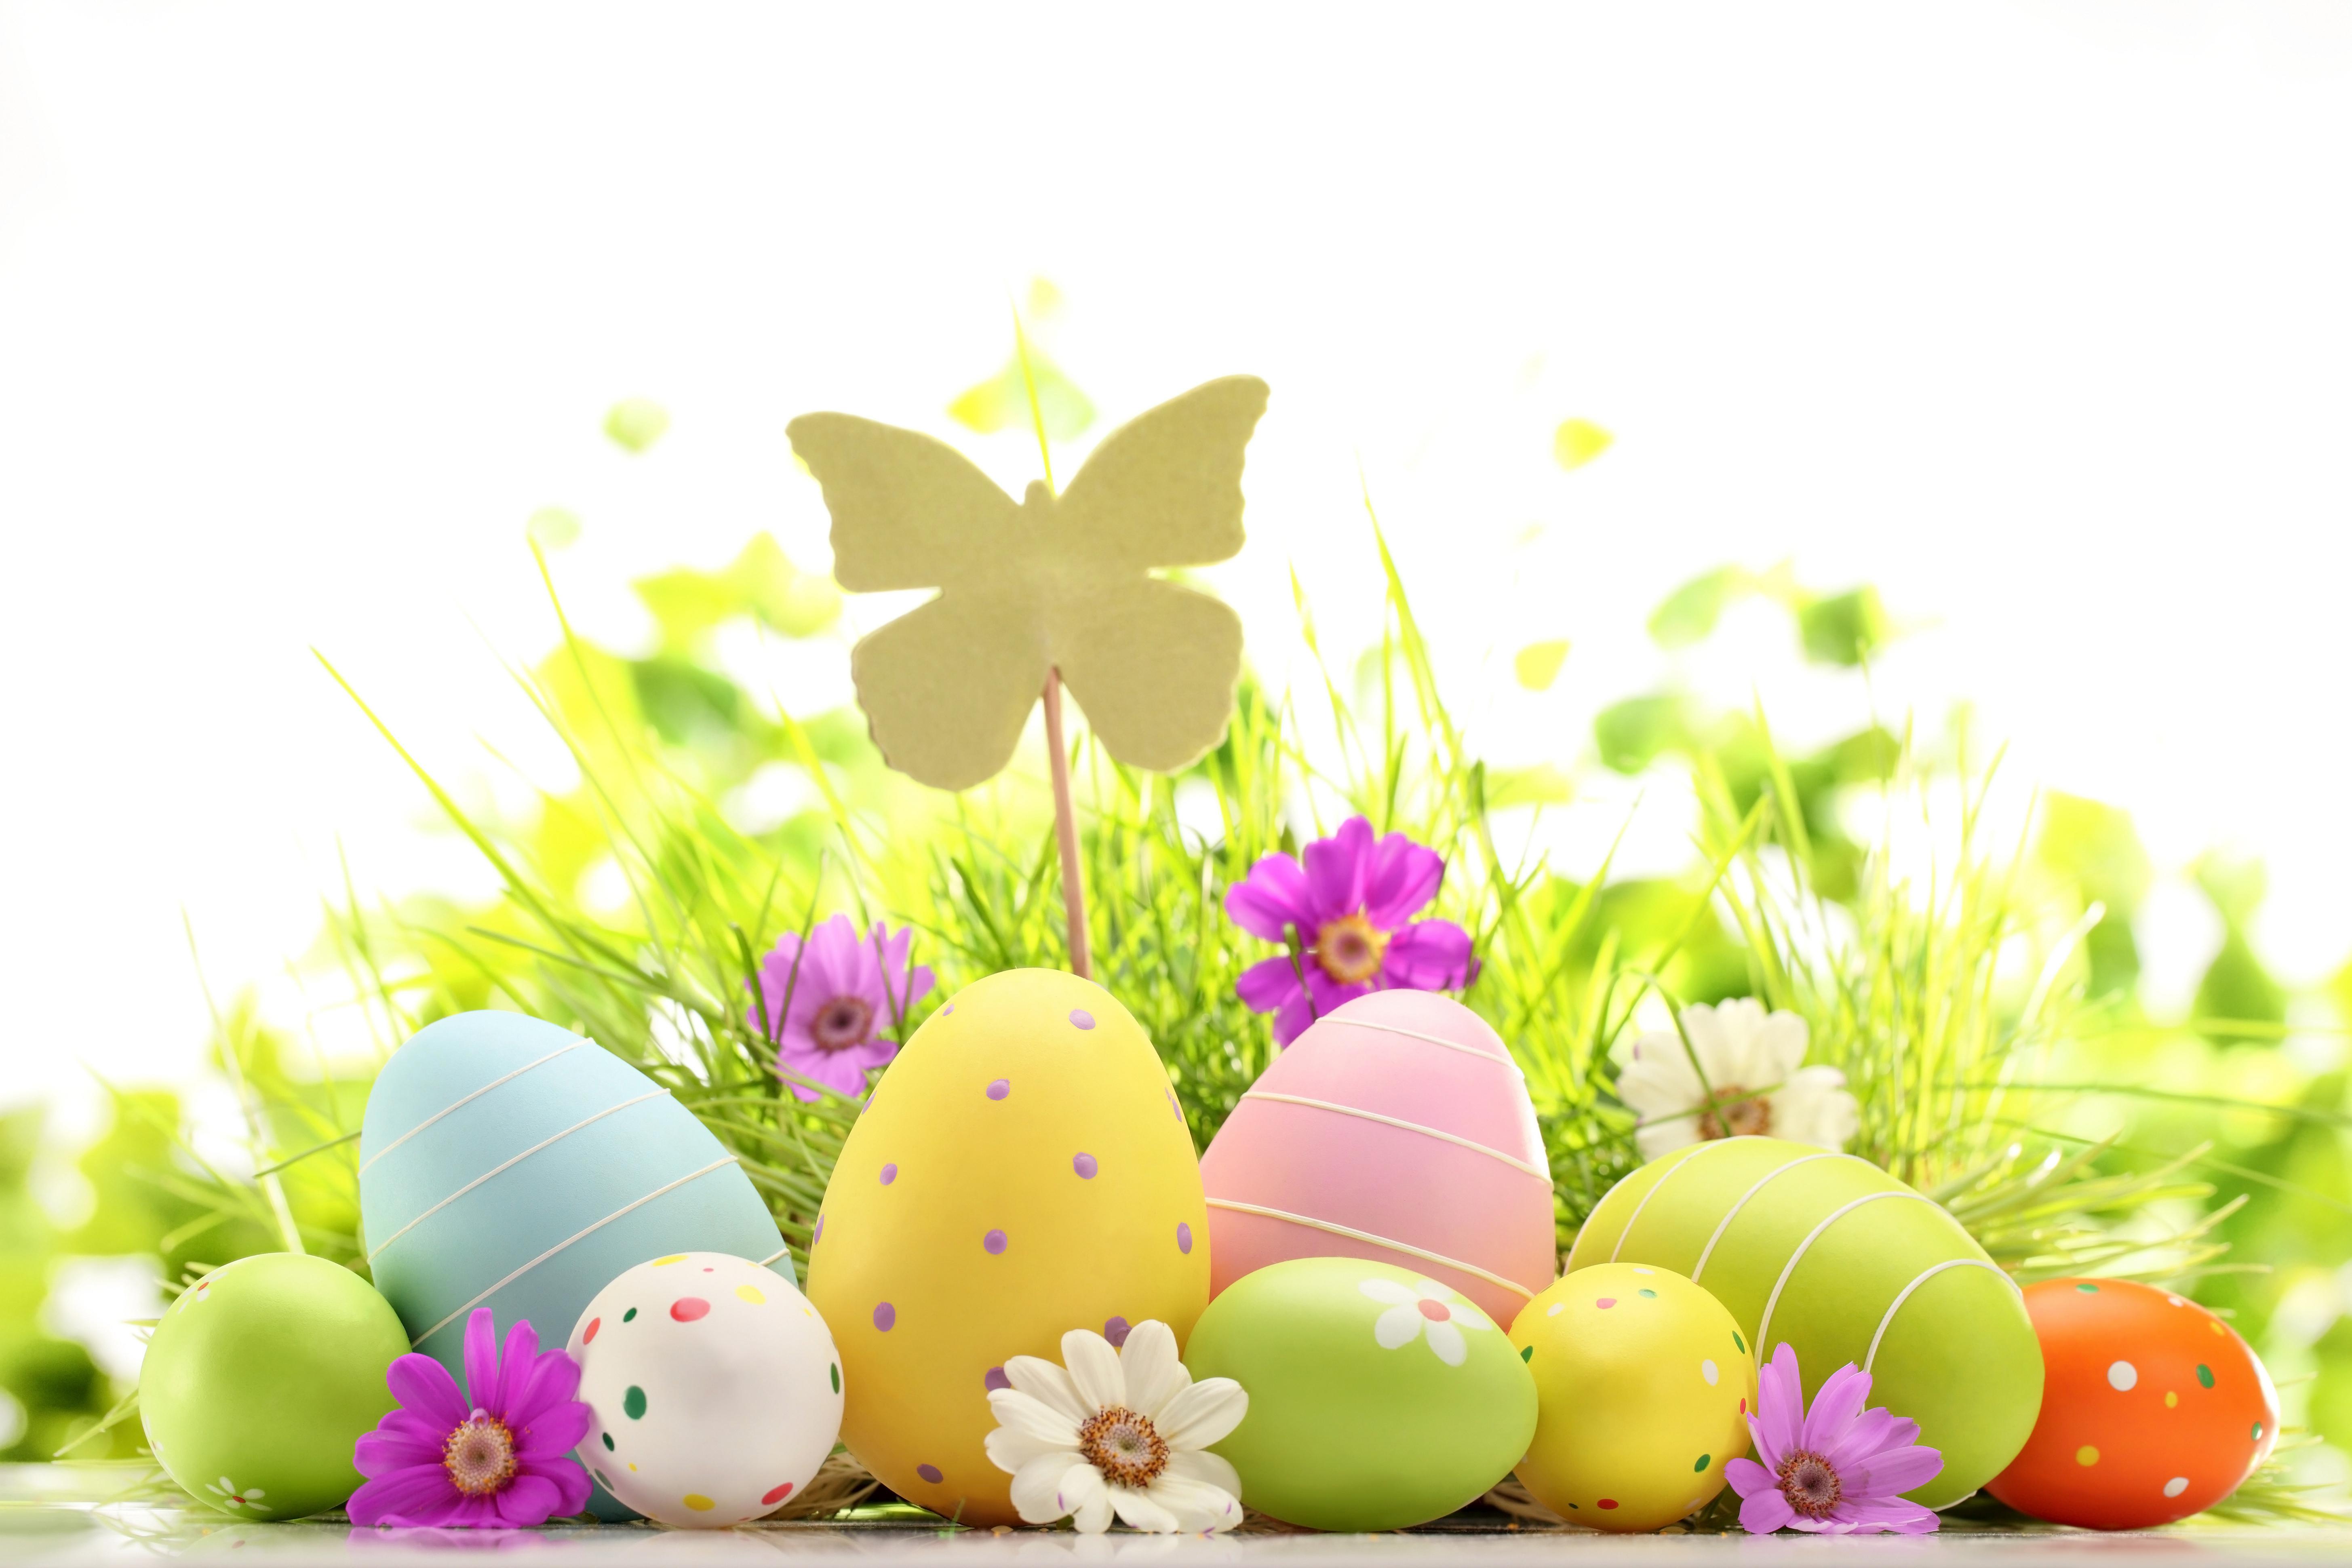 Happy Easter My Friends - Salvaged Inspirations